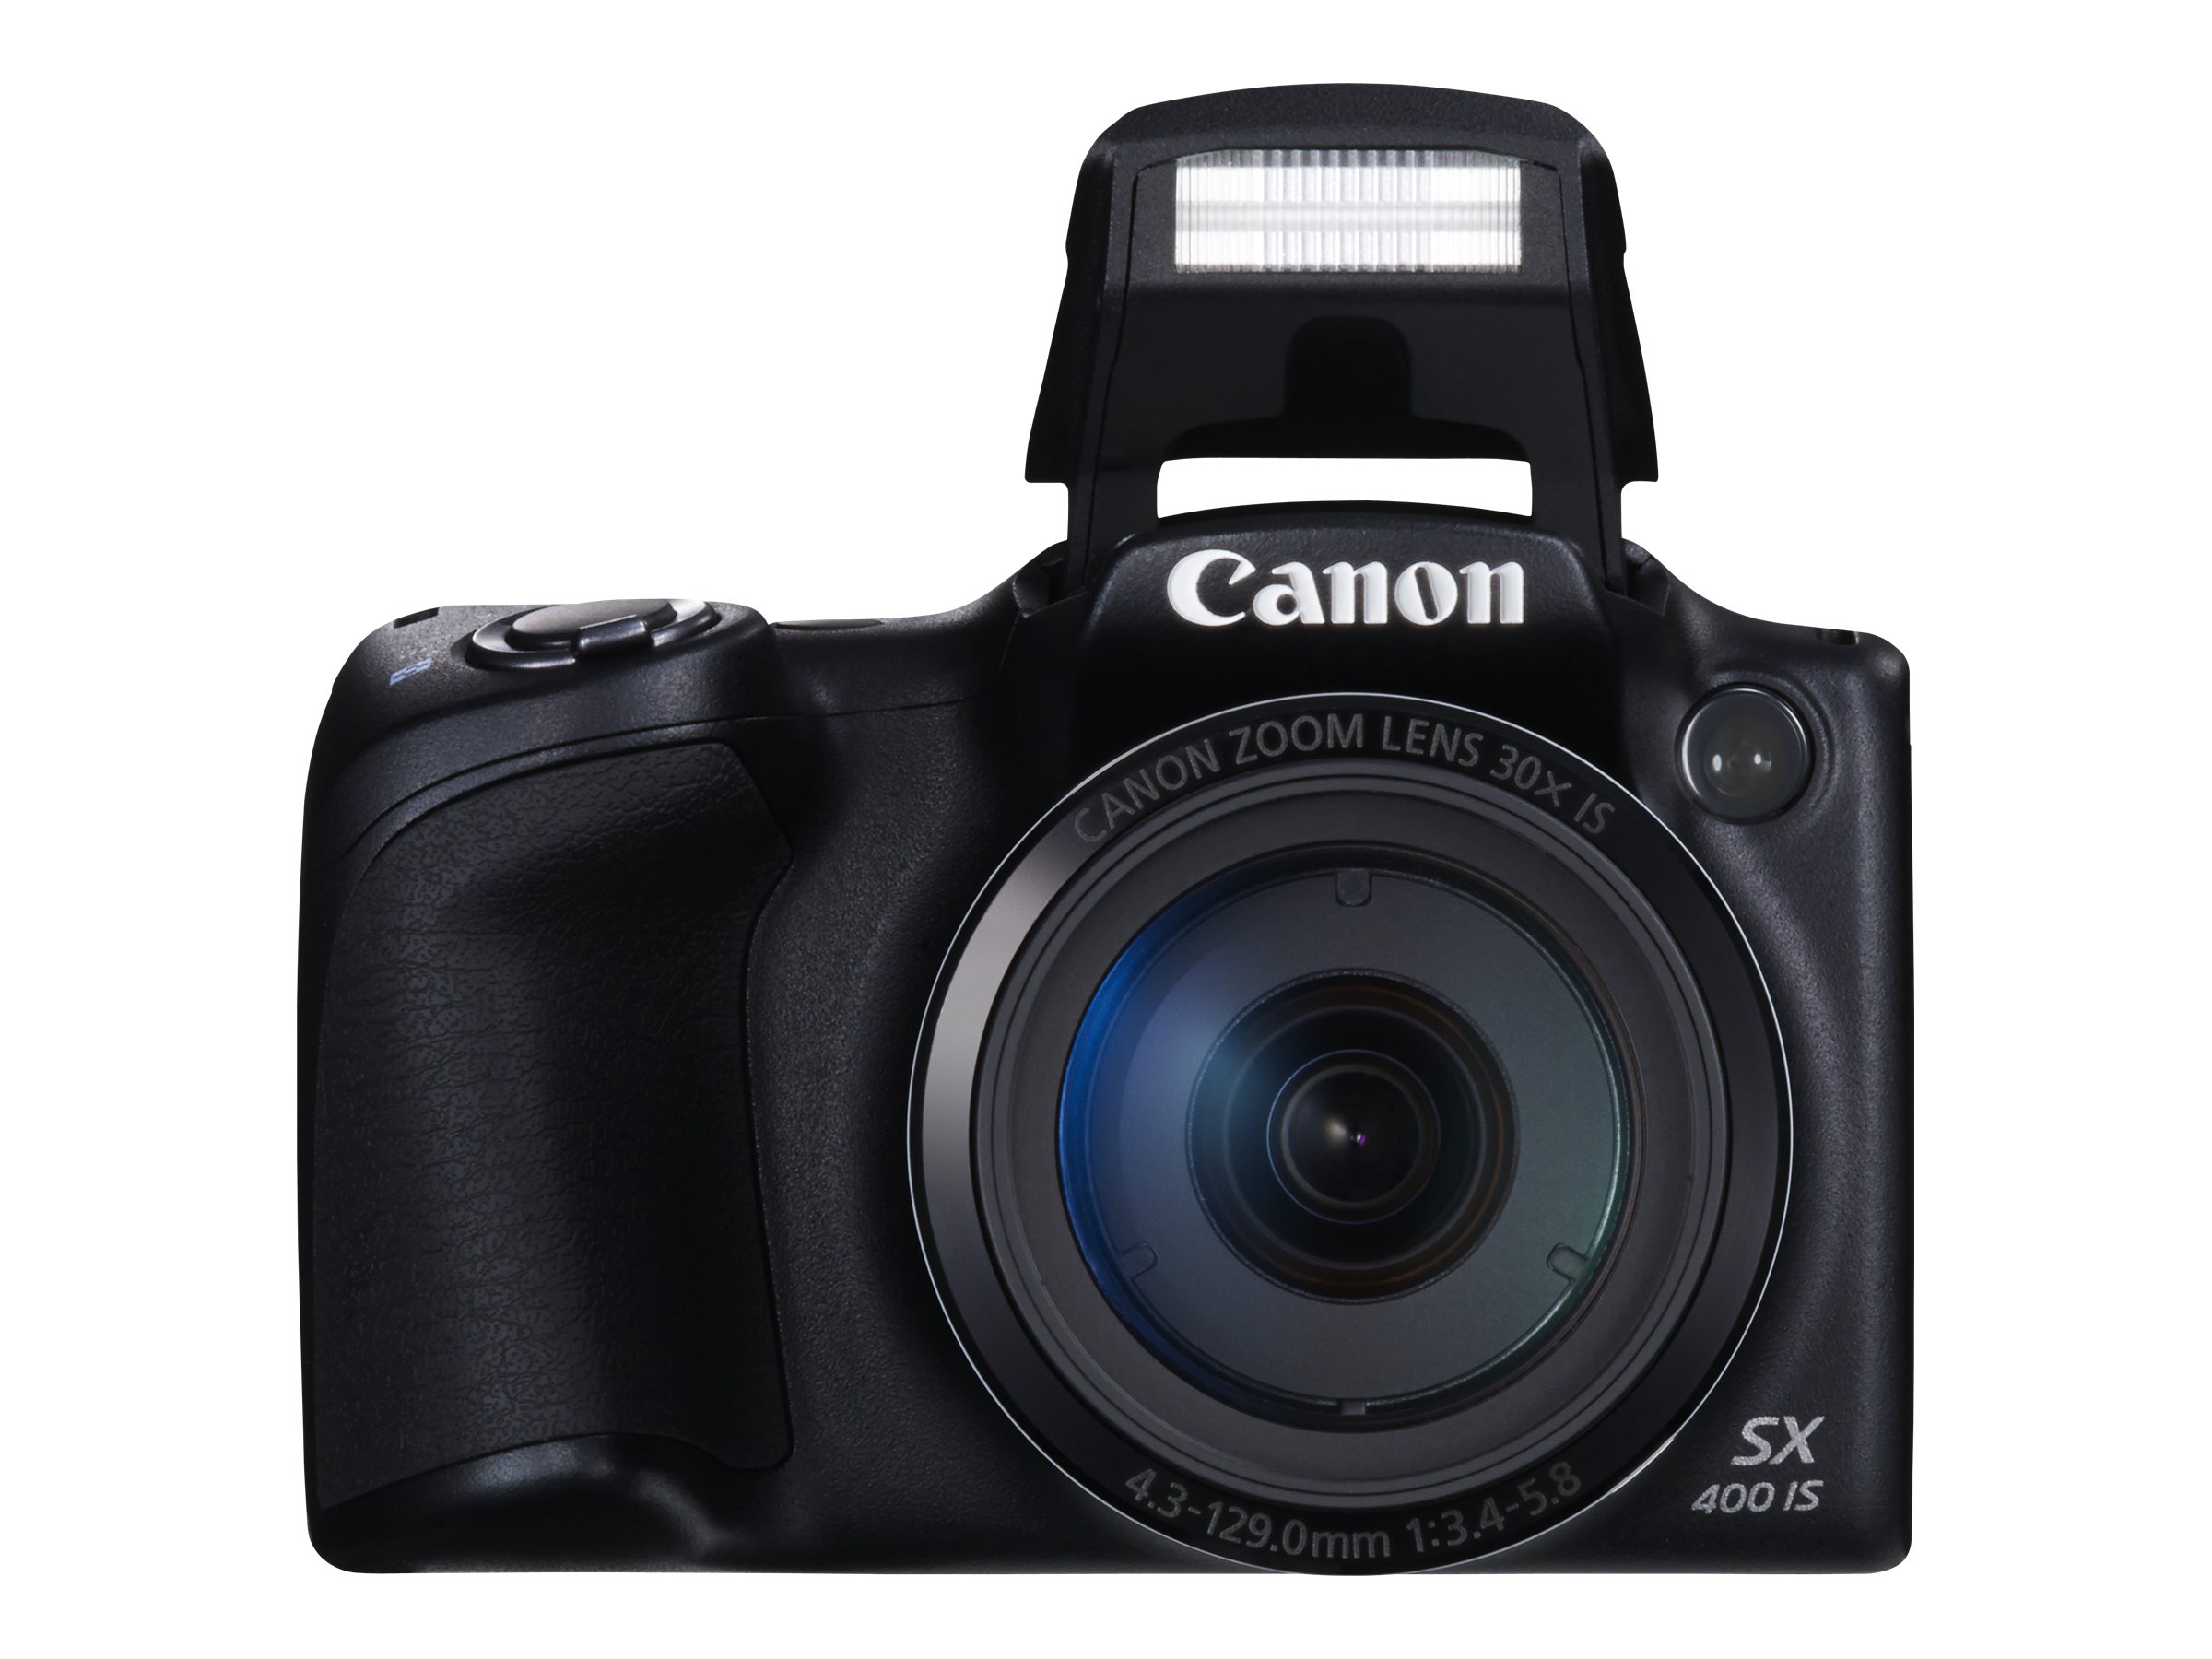 Canon PowerShot SX400 IS - Digital camera - compact - 16.0 MP - 720p - 30x optical zoom - black - image 3 of 9